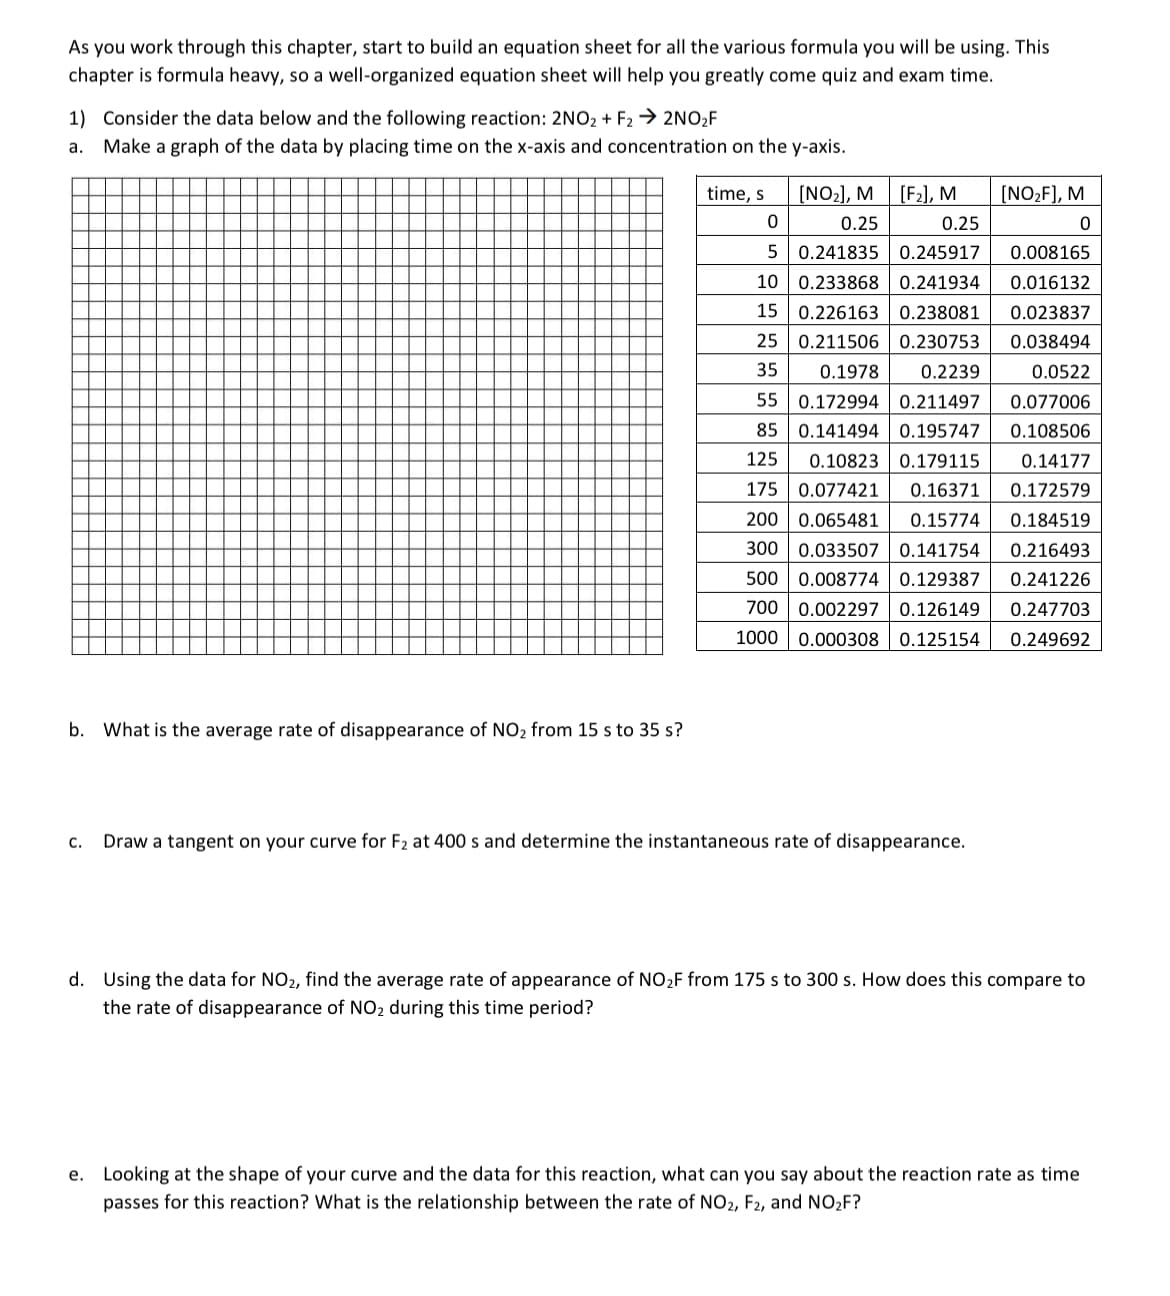 As you work through this chapter, start to build an equation sheet for all the various formula you will be using. This
chapter is formula heavy, so a well-organized equation sheet will help you greatly come quiz and exam time.
1) Consider the data below and the following reaction: 2NO₂+ F₂ → 2NO₂F
a.
Make a graph of the data by placing time on the x-axis and concentration on the y-axis.
b. What is the average rate of disappearance of NO₂ from 15 s to 35 s?
0
[NO₂], M [F2], M
0.25
0.241835 0.245917
0.25
5
10 0.233868 0.241934
15 0.226163 0.238081
time, s
e.
C. Draw a tangent on your curve for F₂ at 400 s and determine the instantaneous rate of disappearance.
[NO₂F], M
0
0.008165
0.016132
0.023837
25
0.211506 0.230753 0.038494
0.0522
0.077006
0.108506
35
0.1978 0.2239
55 0.172994 0.211497
85 0.141494 0.195747
125 0.10823 0.179115
175
200
300 0.033507 0.141754
0.14177
0.077421 0.16371
0.172579
0.065481 0.15774
0.184519
0.216493
500
0.008774 0.129387
0.241226
700 0.002297 0.126149 0.247703
1000 0.000308 0.125154 0.249692
d. Using the data for NO2, find the average rate of appearance of NO₂F from 175 s to 300 s. How does this compare to
the rate of disappearance of NO₂ during this time period?
Looking at the shape of your curve and the data for this reaction, what can you say about the reaction rate as time
passes for this reaction? What is the relationship between the rate of NO2, F2, and NO₂F?